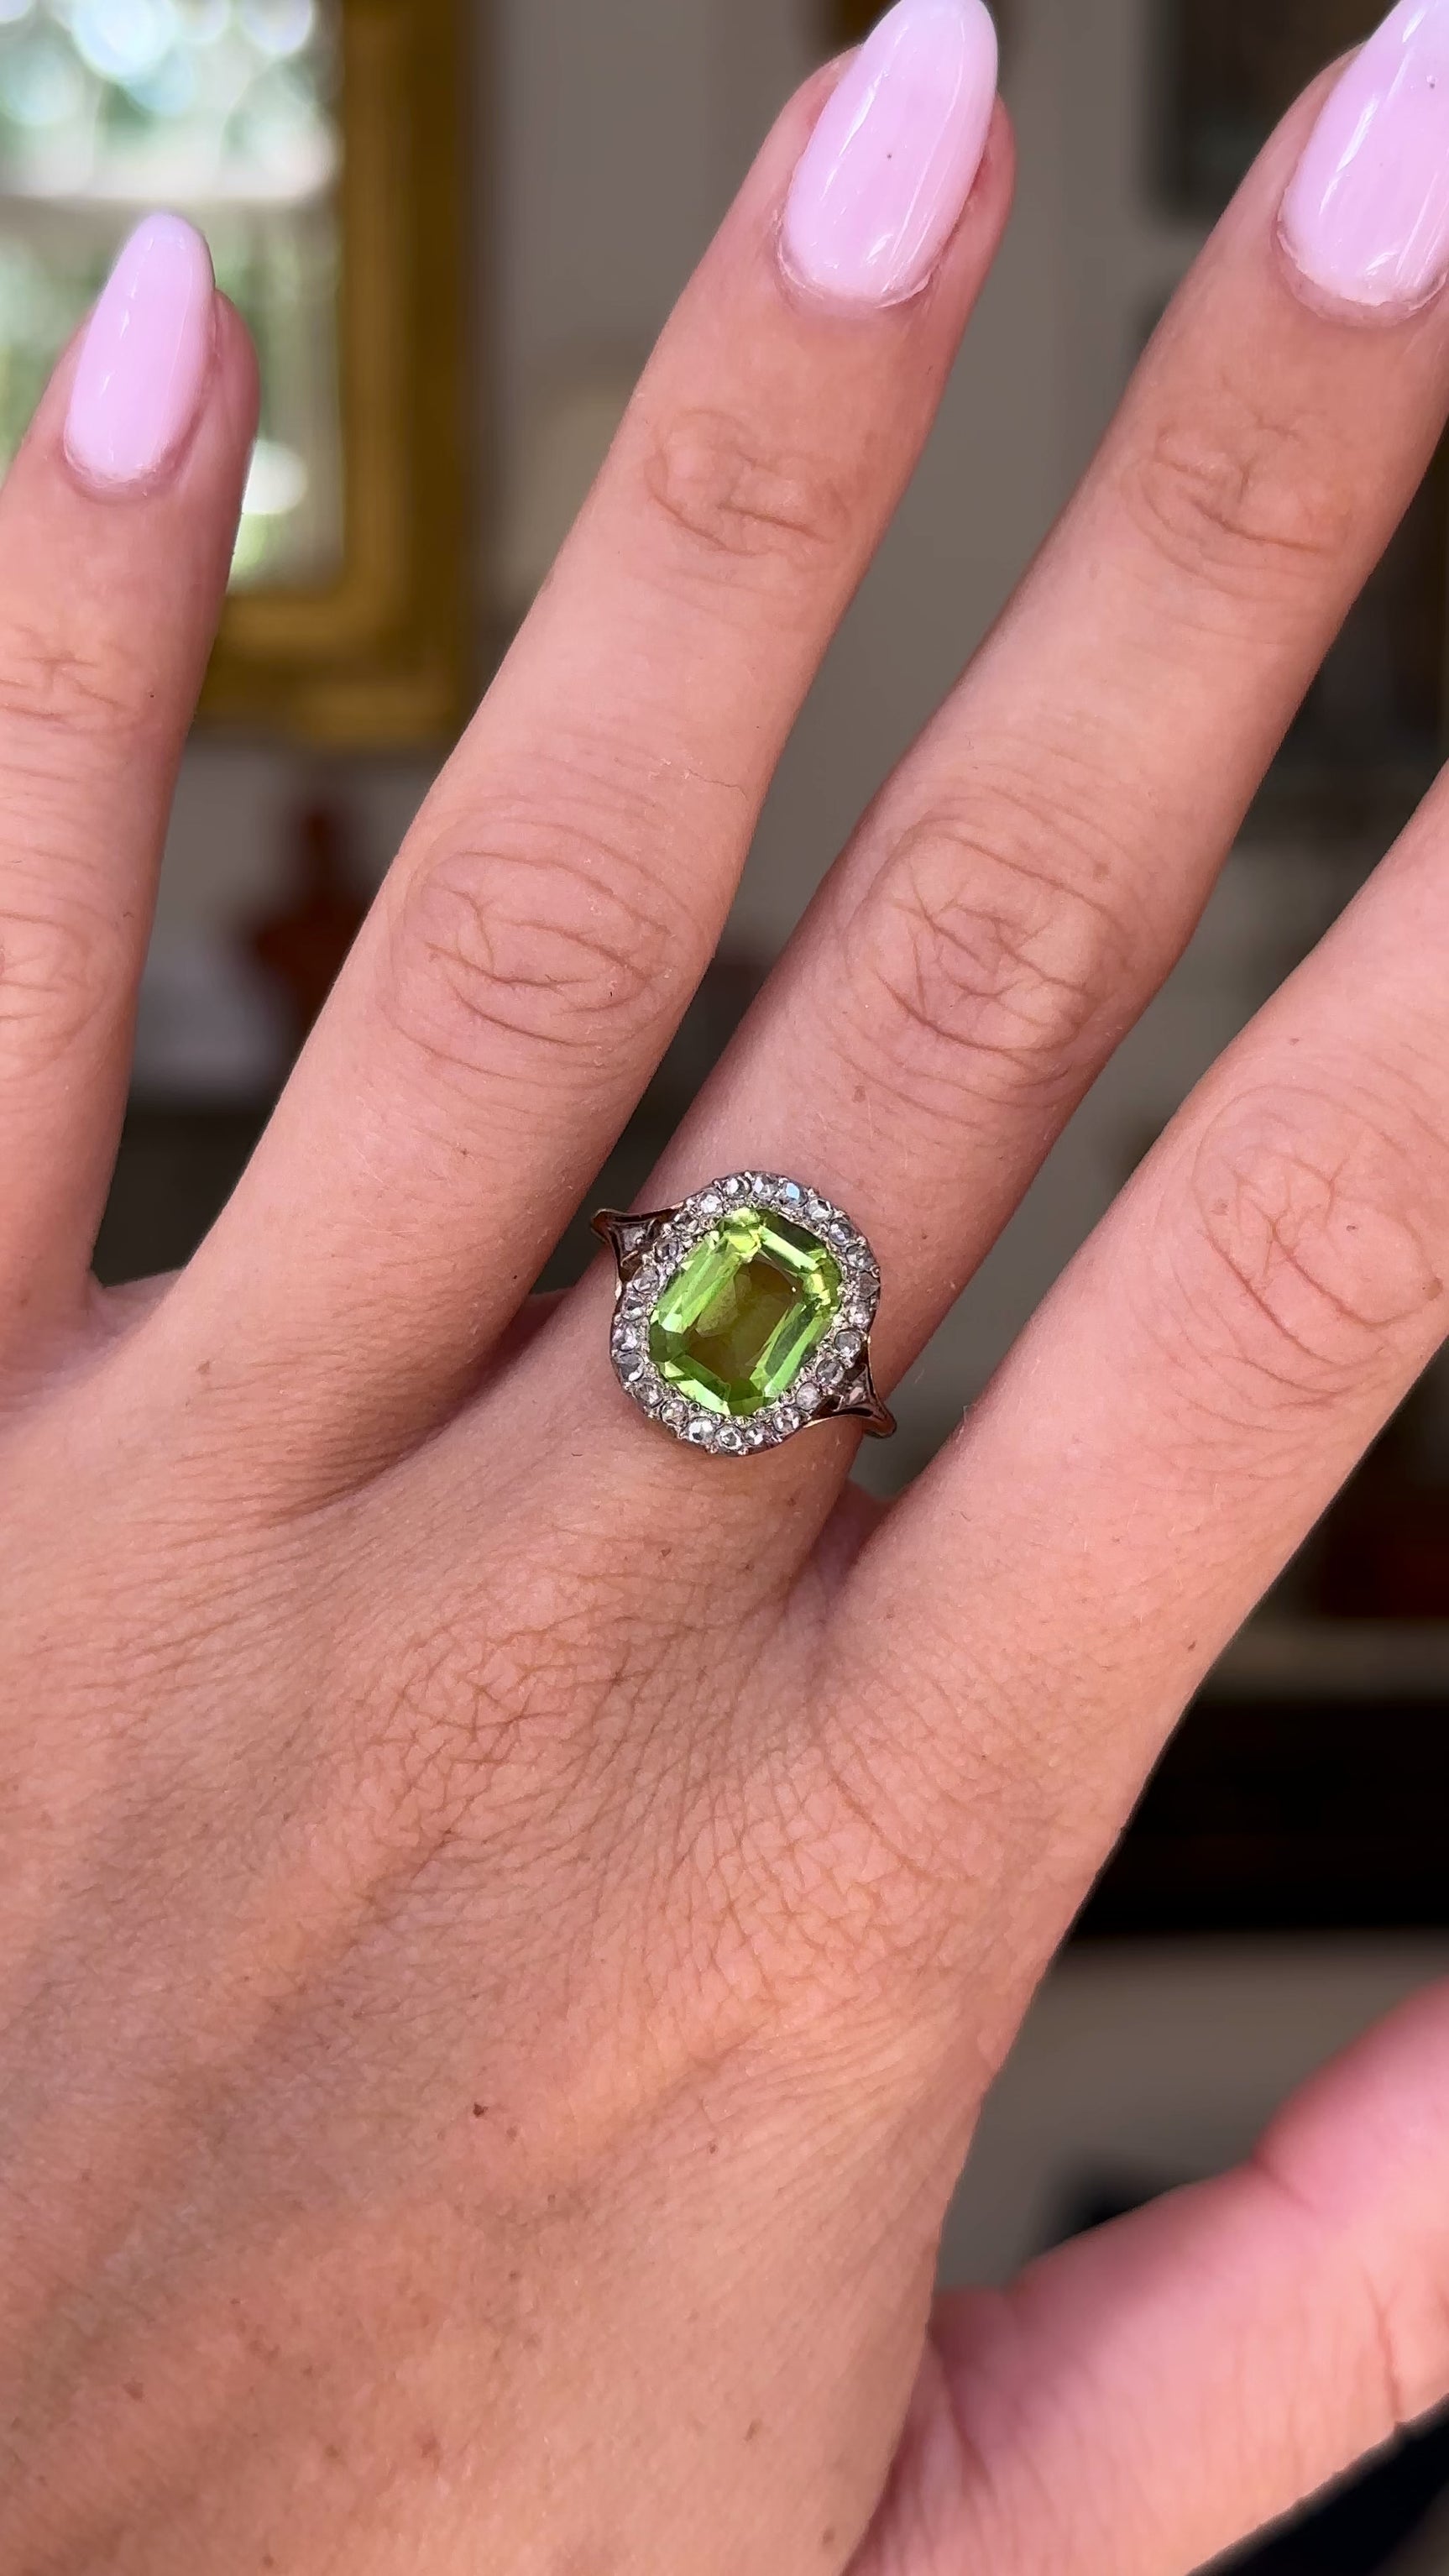 antique peridot and diamond ring, worn on hand and moved away from lens to give perspective, front view.